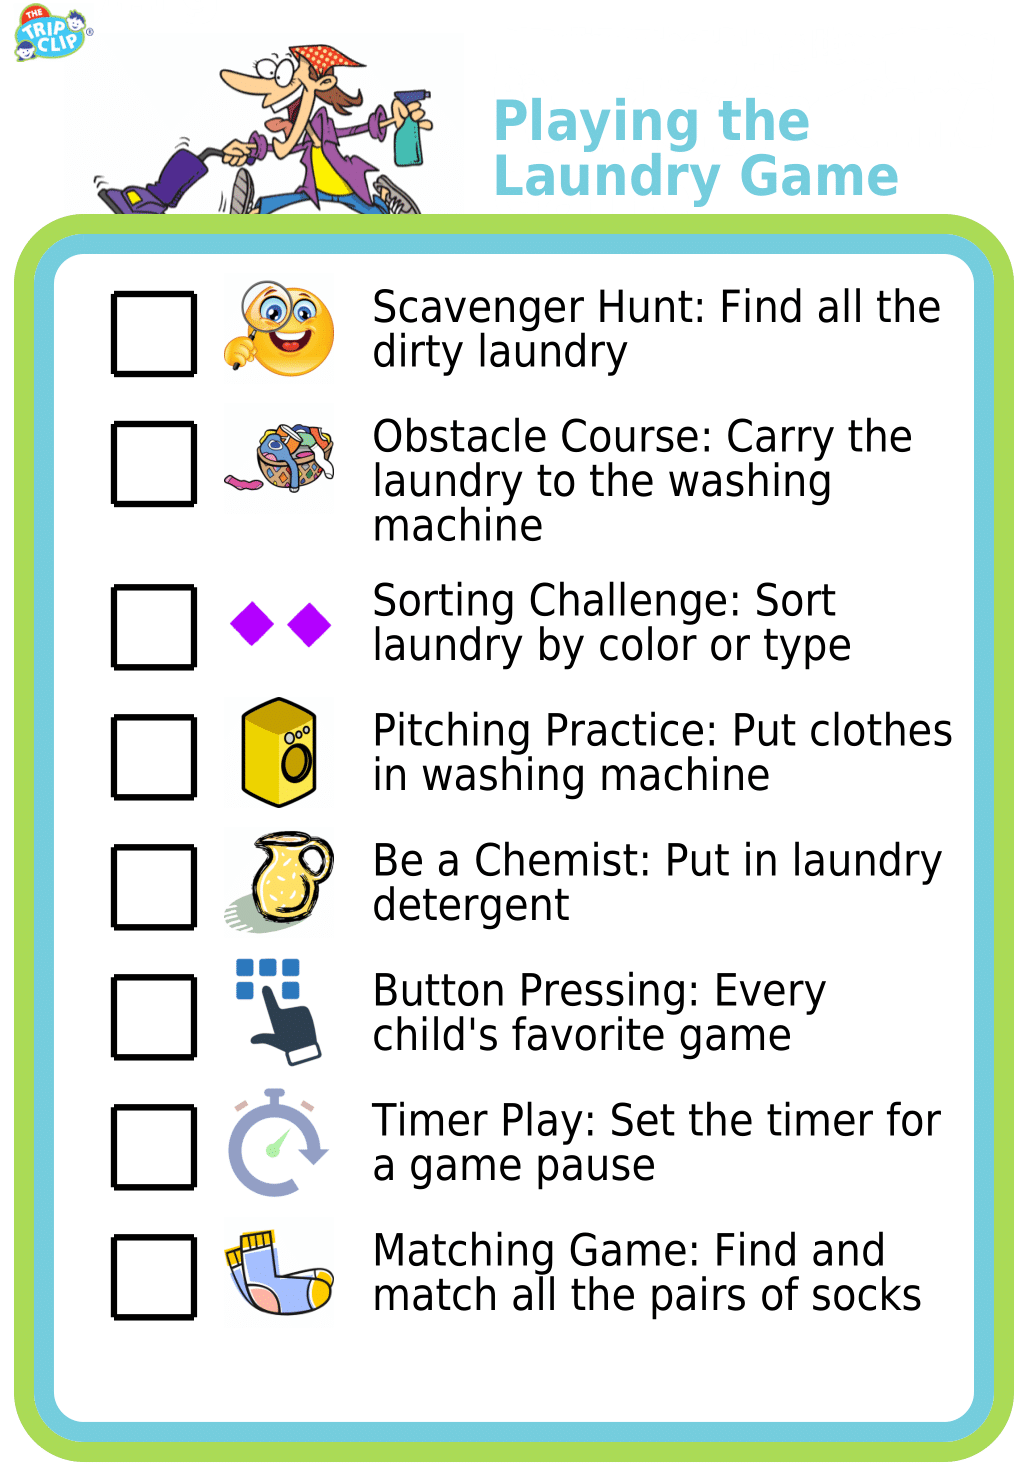 Picture checklist turning laundry into a game